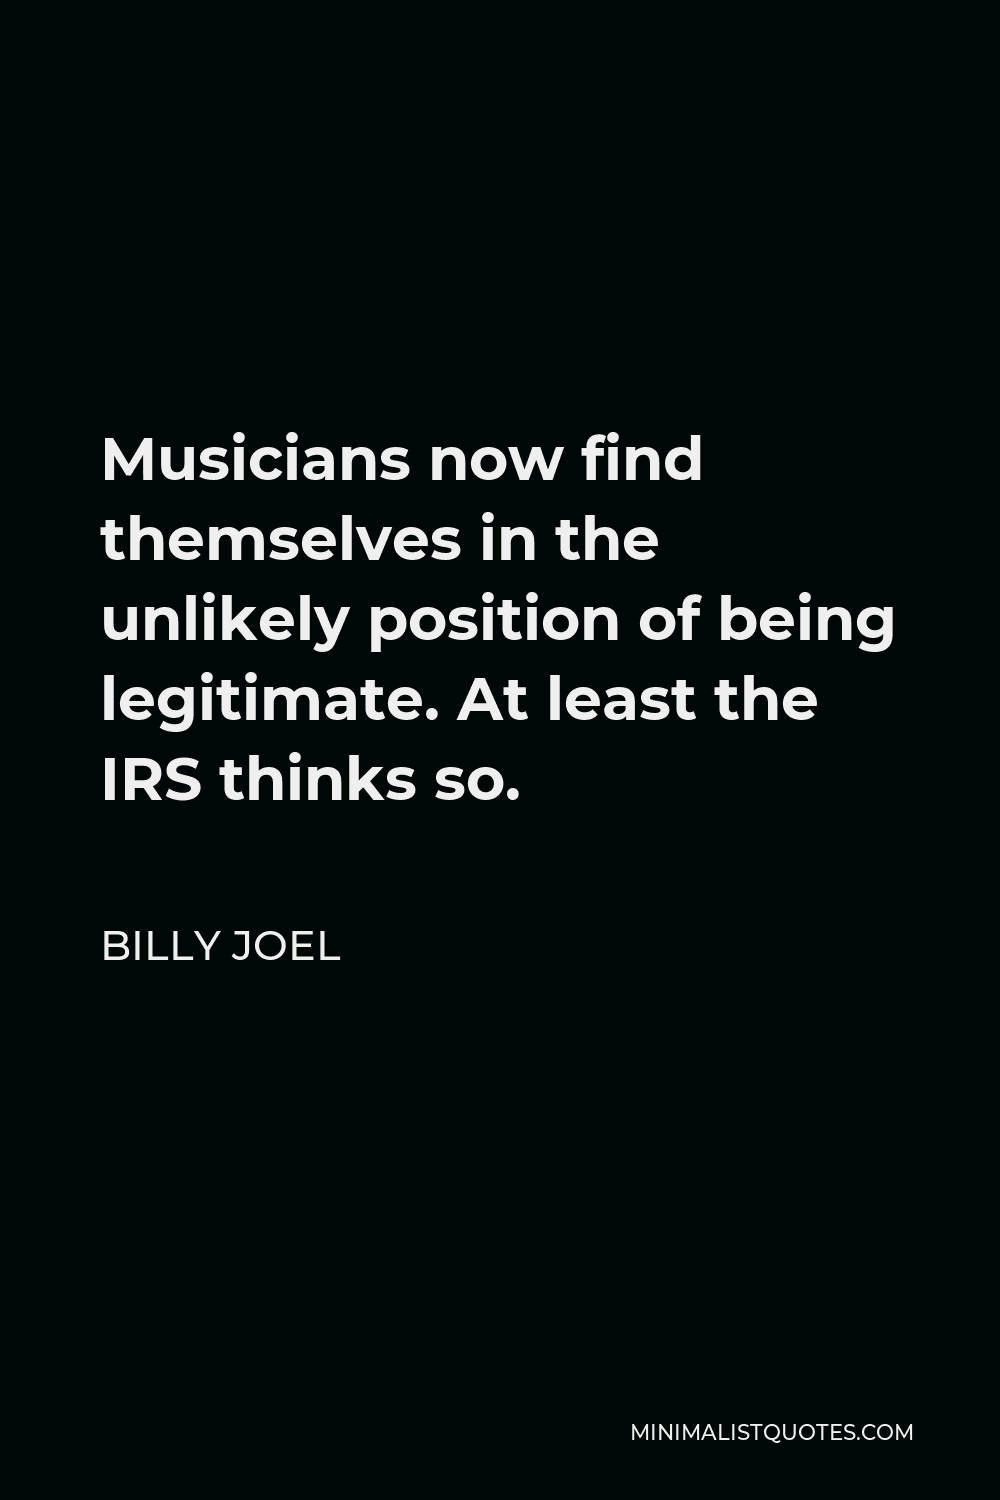 Billy Joel Quote - Musicians now find themselves in the unlikely position of being legitimate. At least the IRS thinks so.